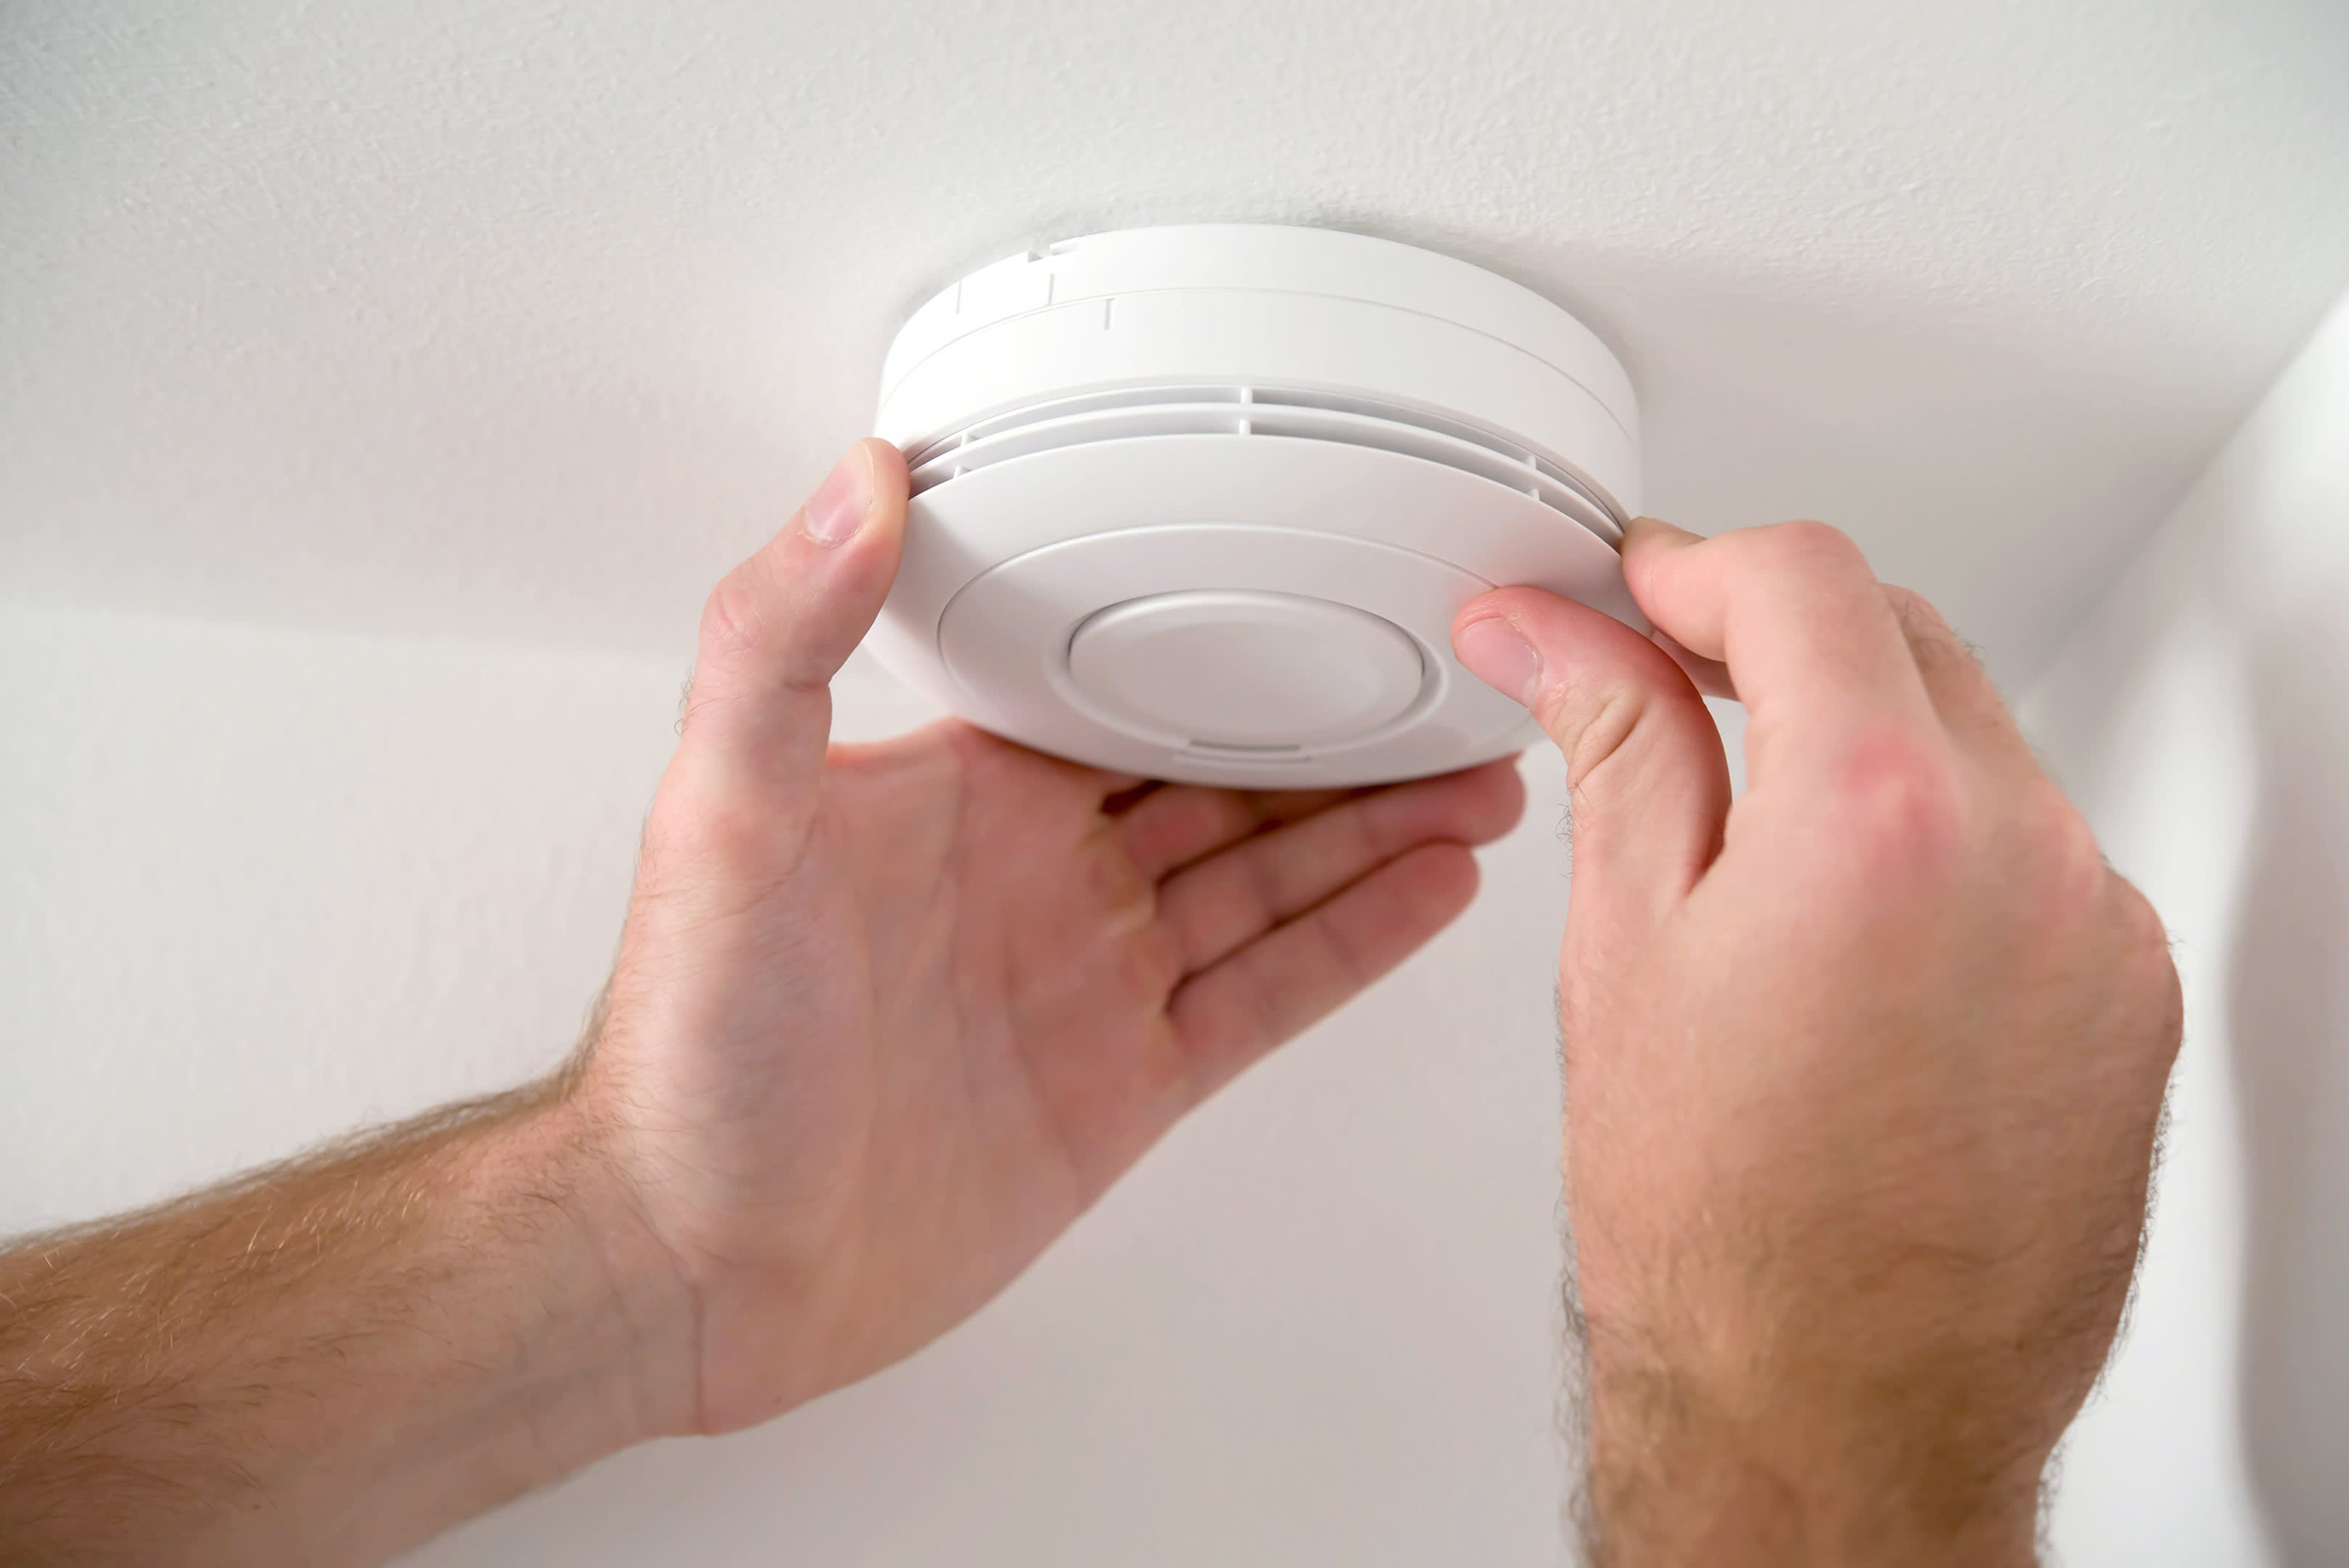 Five Benefits of Installing Home Security Devices